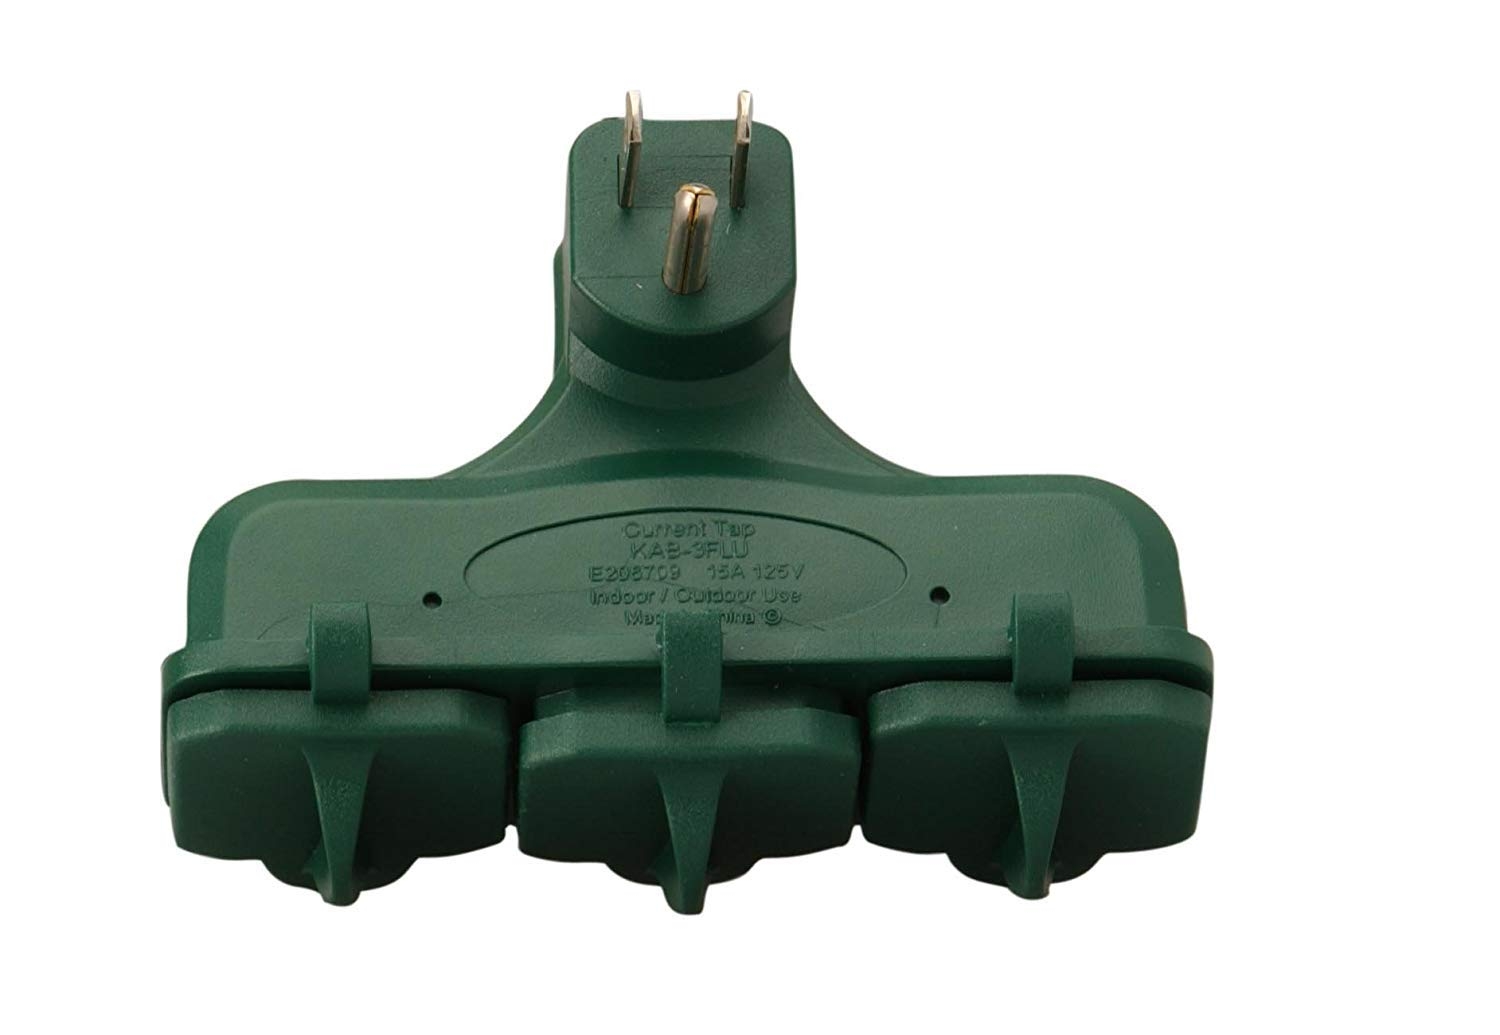 3-Outlet Adapter Suitable For Outdoor Or Indoor Use, Weatherproof, Ideal for Holiday Decorations, Space Saving Right Angled Multi Adapter, Durable and Versatile, Green Color Limit Edition